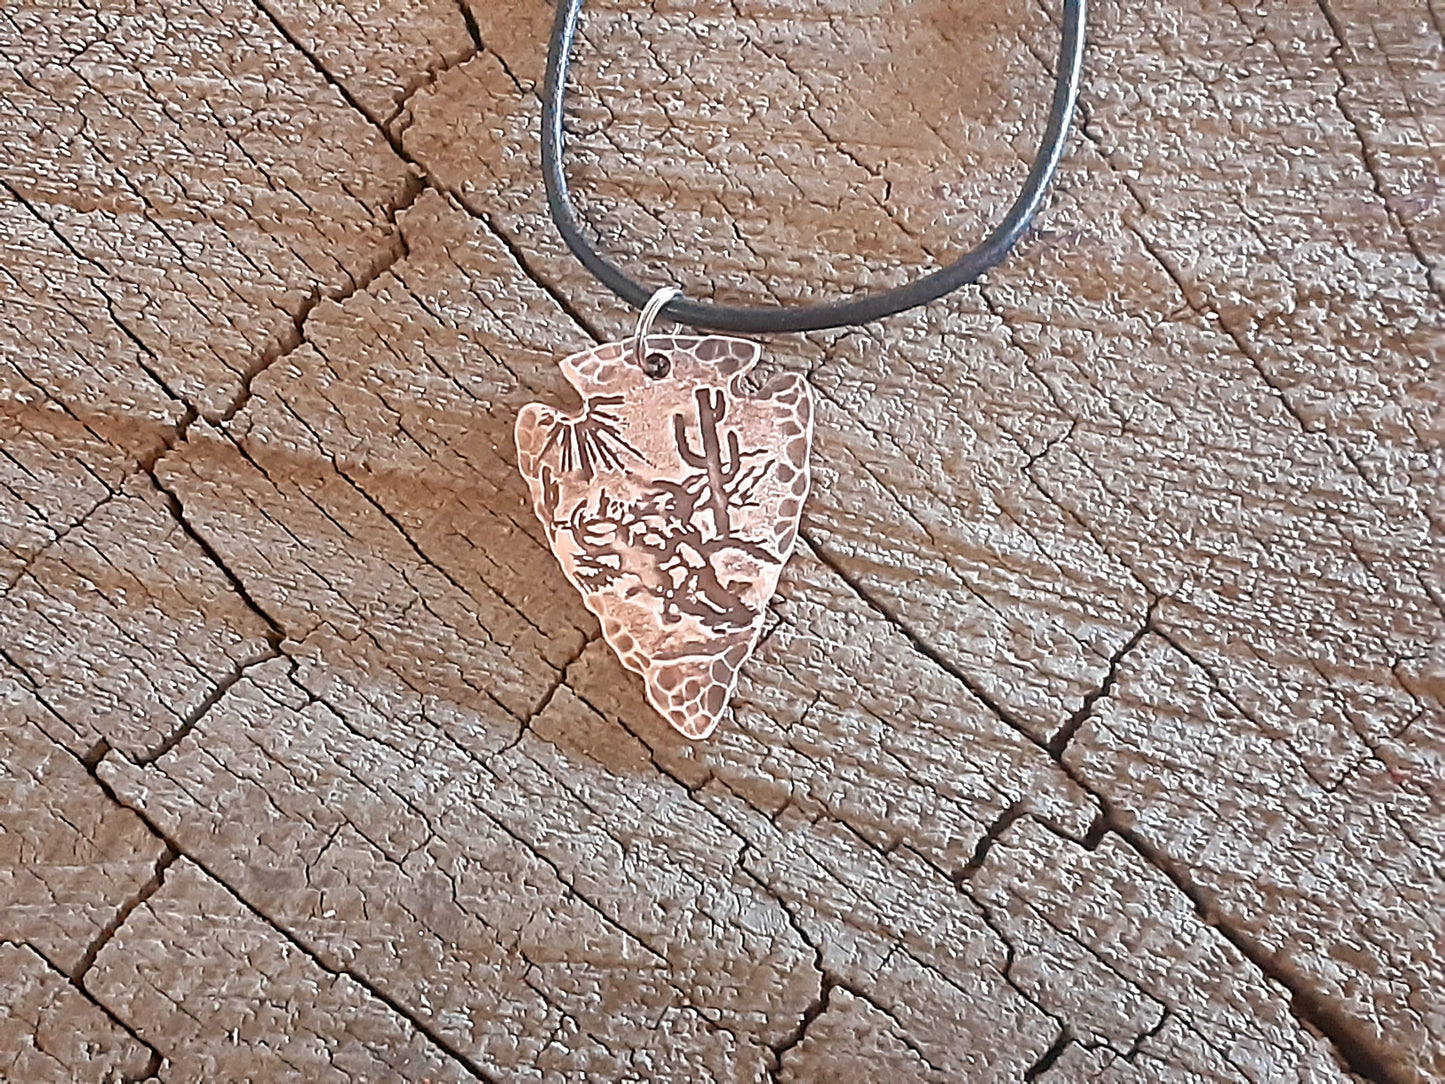 copper arrowhead necklace with desert scene - hammered and rustic finish - mens gift - mens jewelry